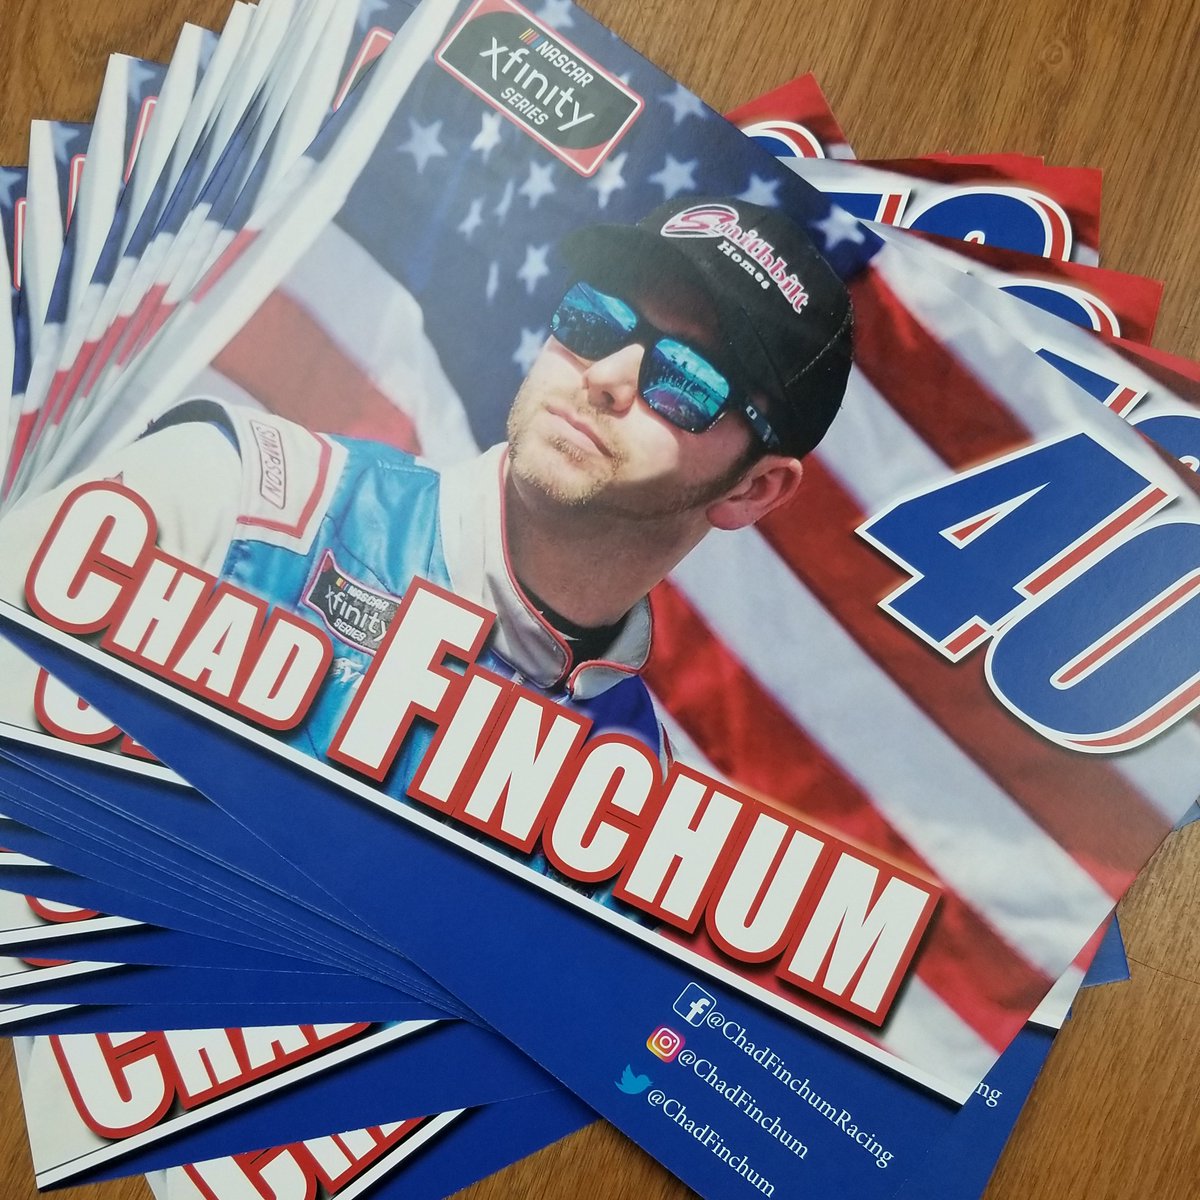 2018 hero cards available... send a S.A.S.E. (self-addressed stamped envelope, size to fit 8.5” x 11” card), and Chad will sign and send! Chad Finchum Hero Card, P.O. Box 530, Powell, TN 37849 // PR @SmithbiltHomes @MBMMotorsports @XfinityRacing @A1Finchum #TeamFinchum